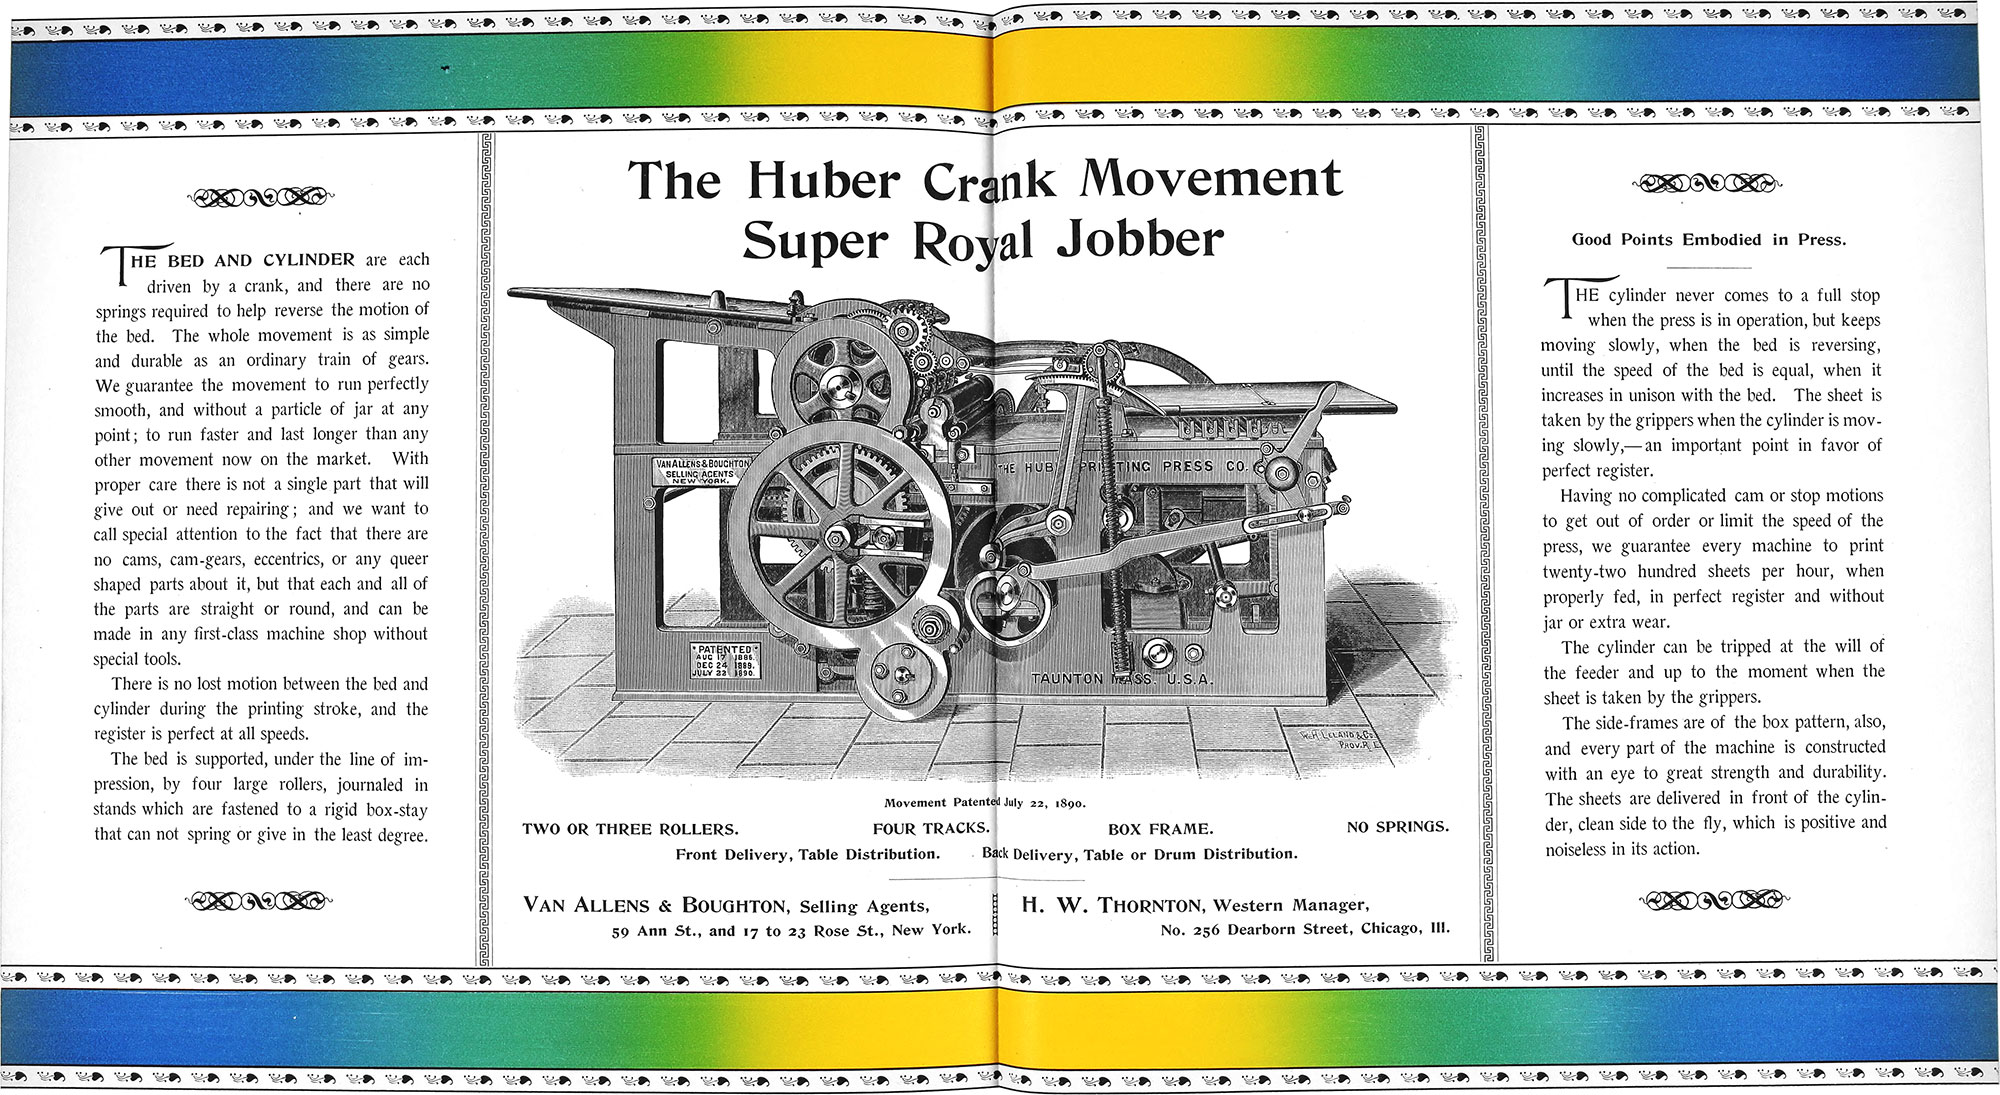 Two-page spread of an advertisement for the Huber Crank Movement Super Royal Jobber with borders at the top and bottom blending blue, green, and yellow